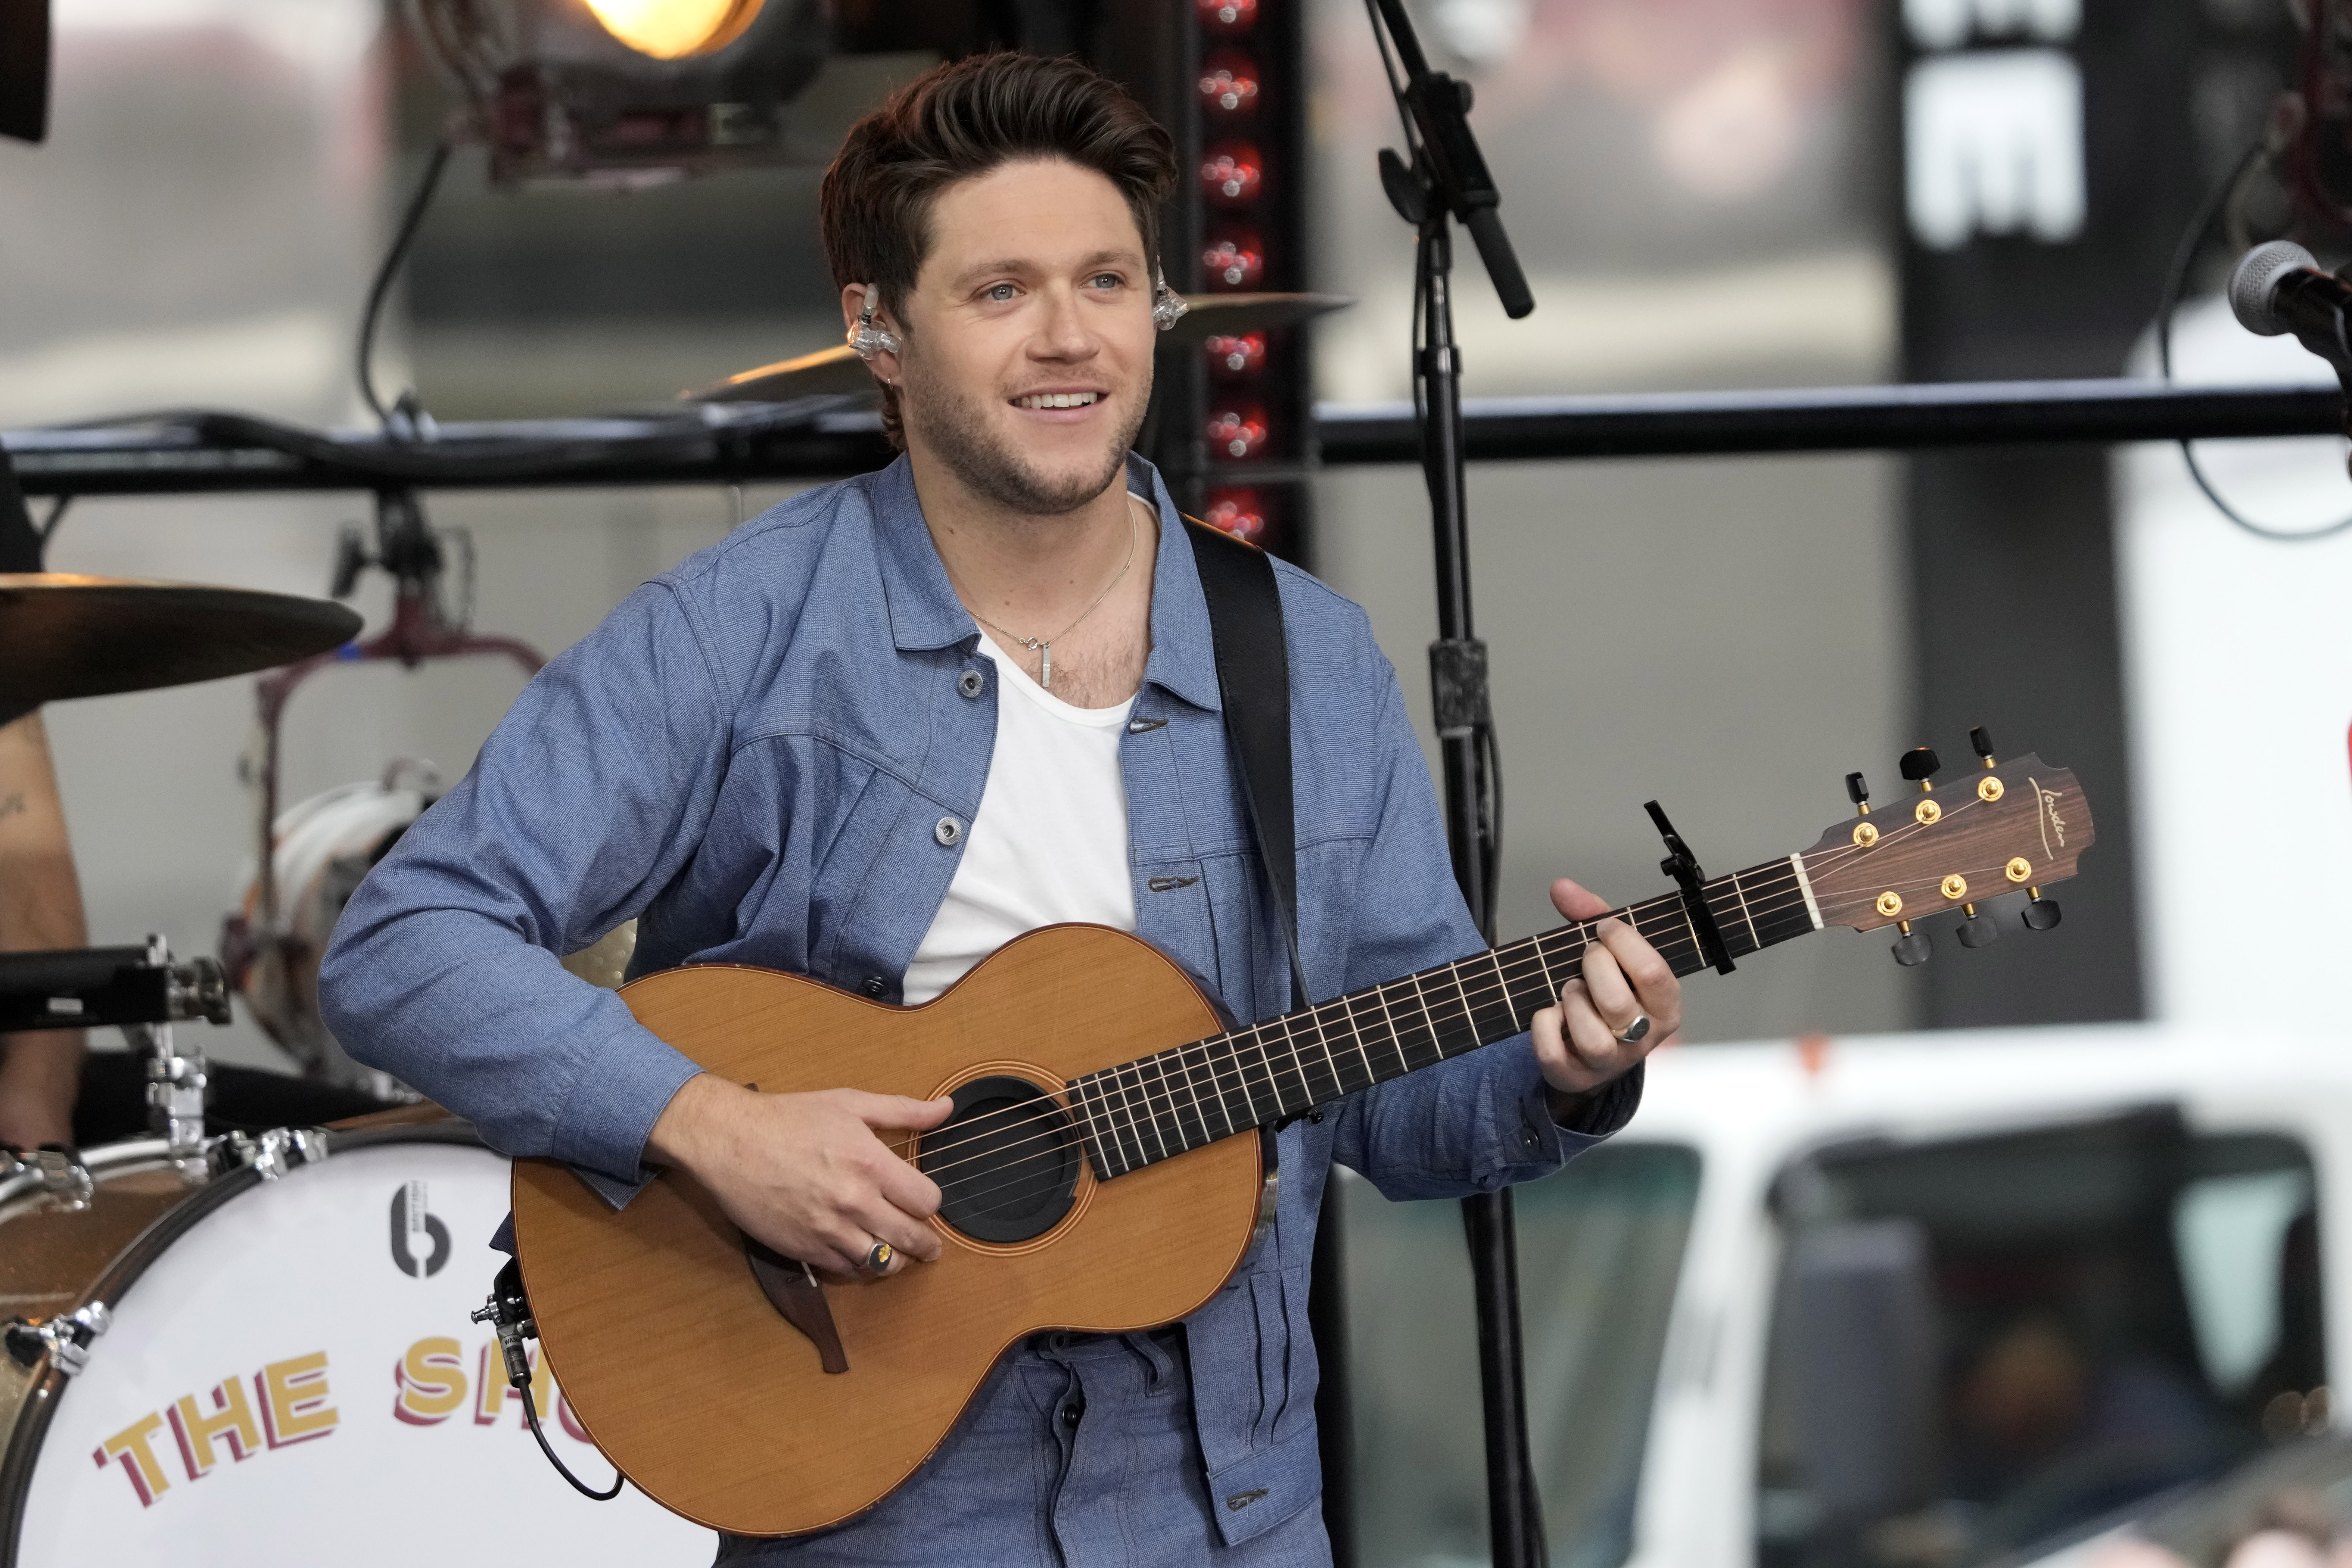 No-show coach Niall Horan has already been replaced on 'The Voice' — by two  coaches